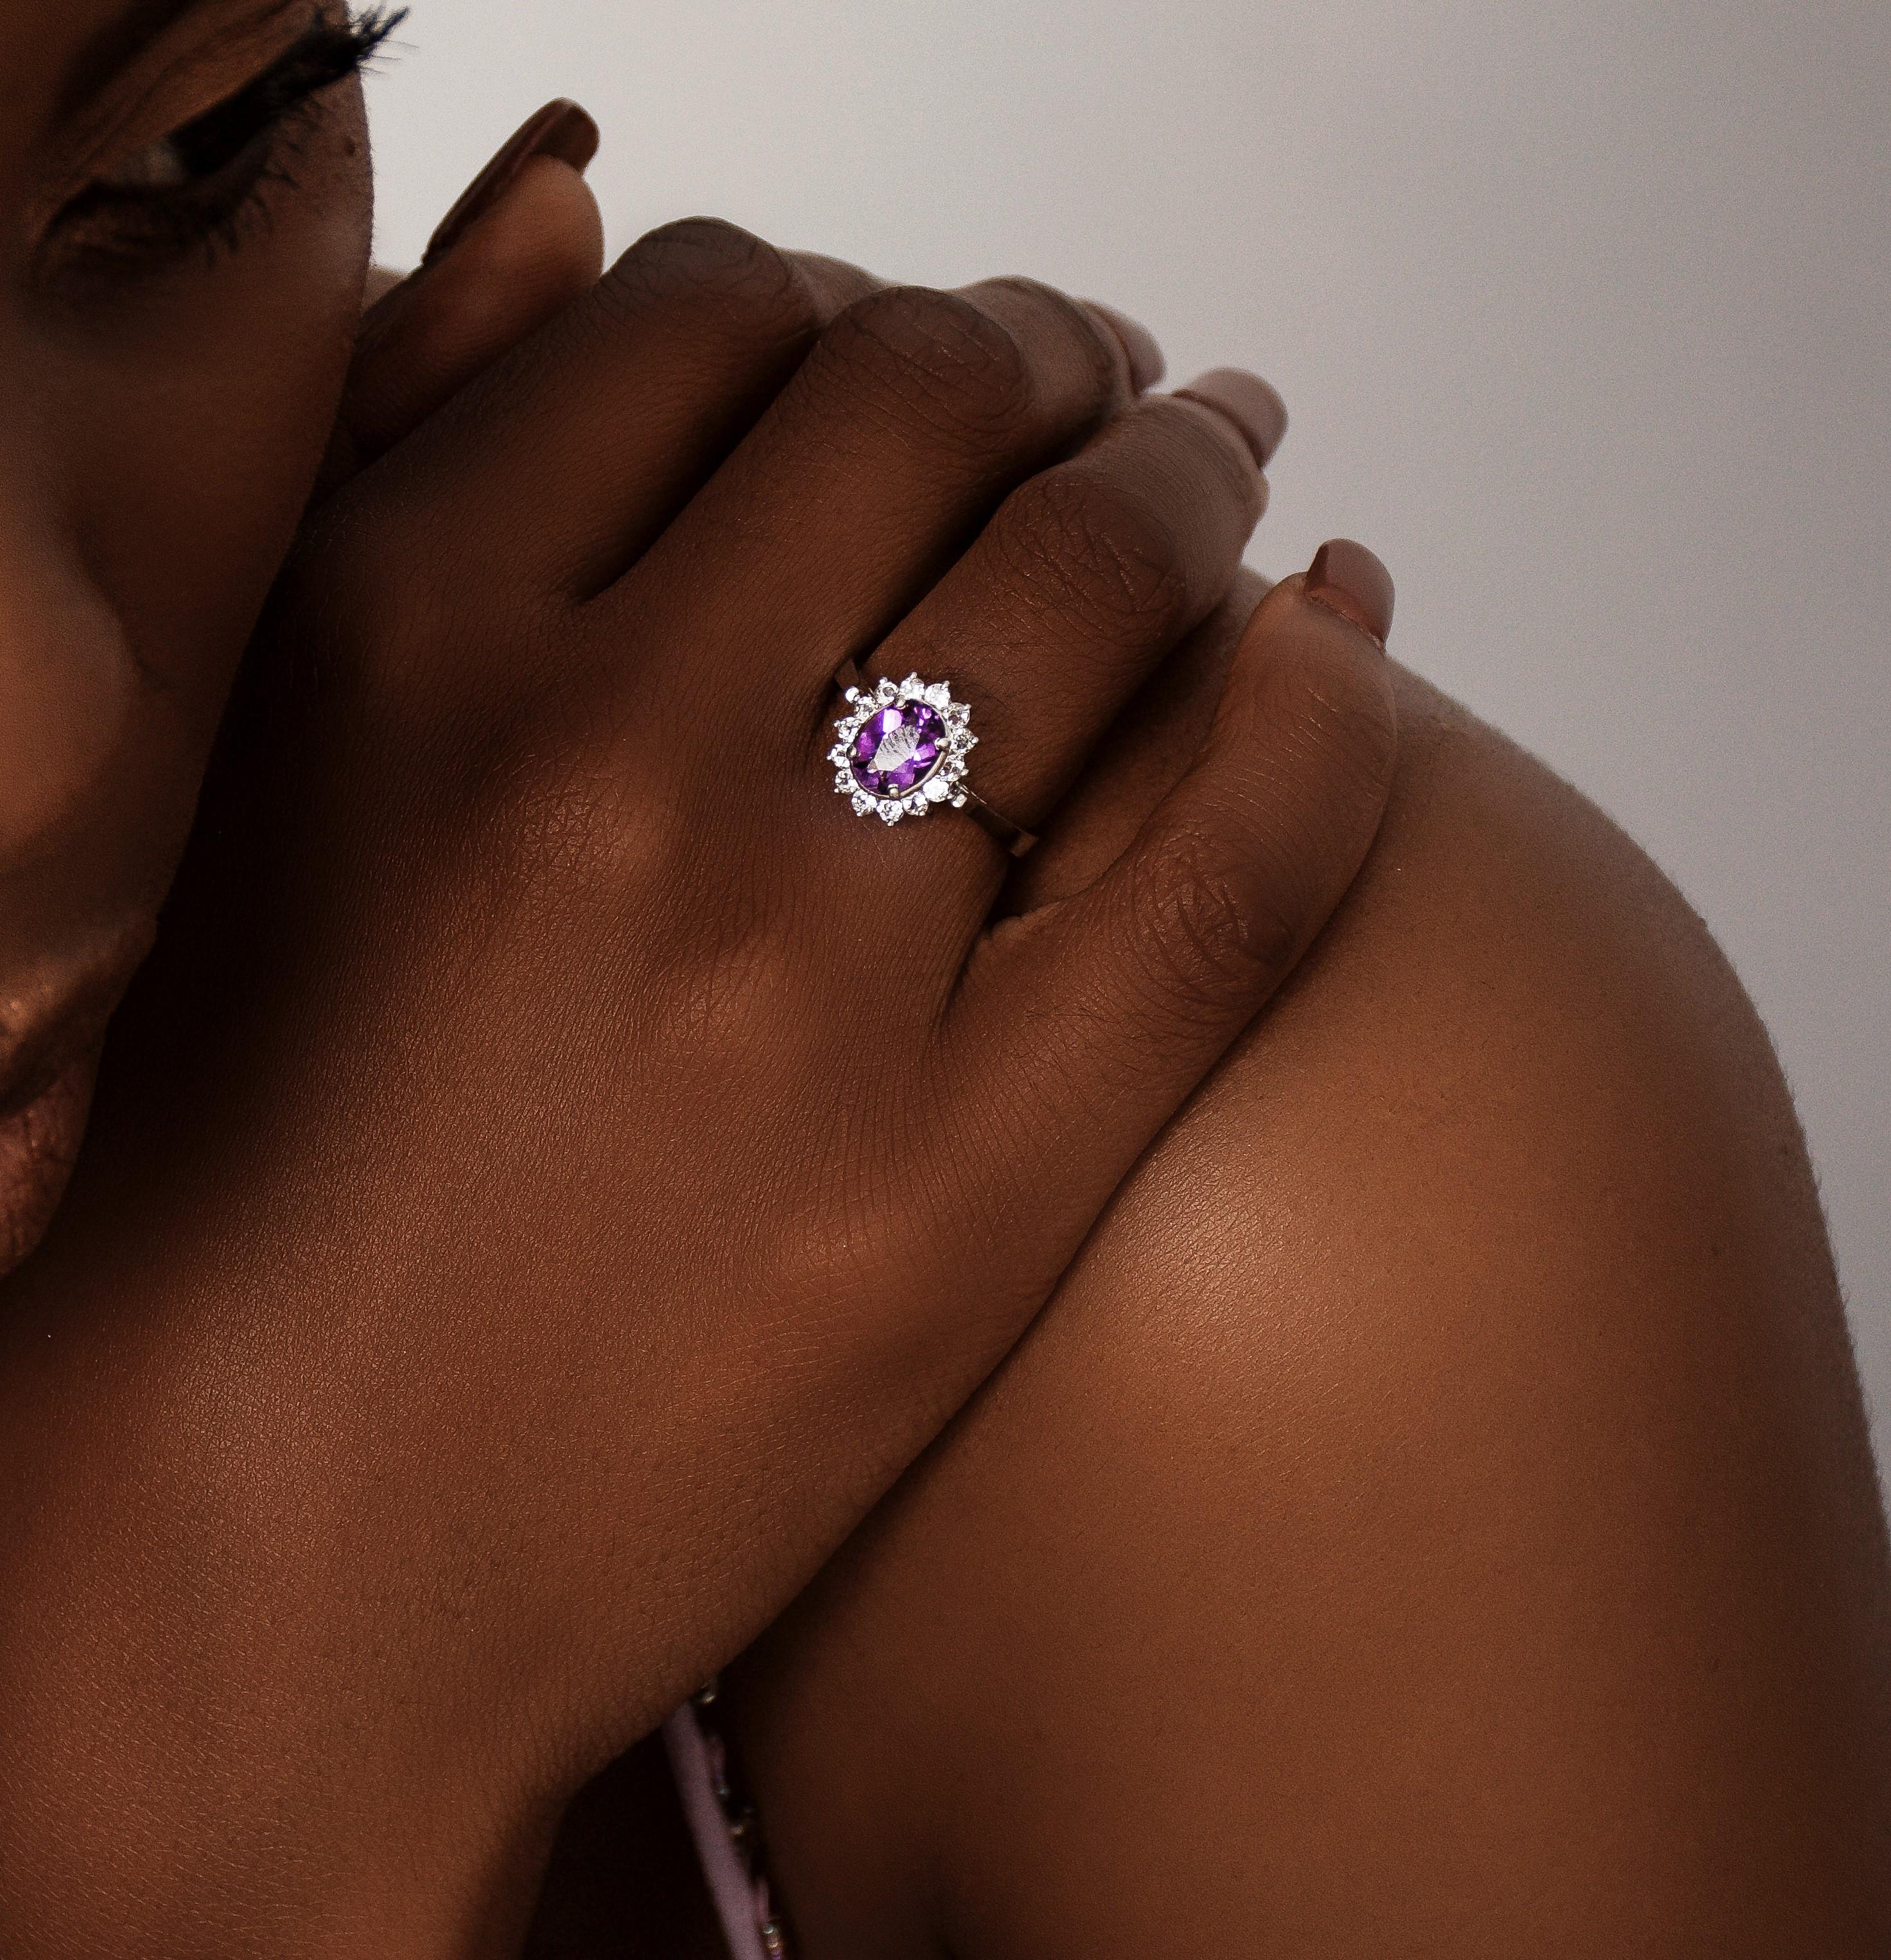 Make a statement with these Elegant 2ct Oval Natural Purple Amethyst and White Zircon Oval ring. It showcases a stunning 7.2x6.8mm oval-shaped natural amethyst, weighing a total of 2 carat. Surrounding the amethyst are 15 dazzling rare natural white